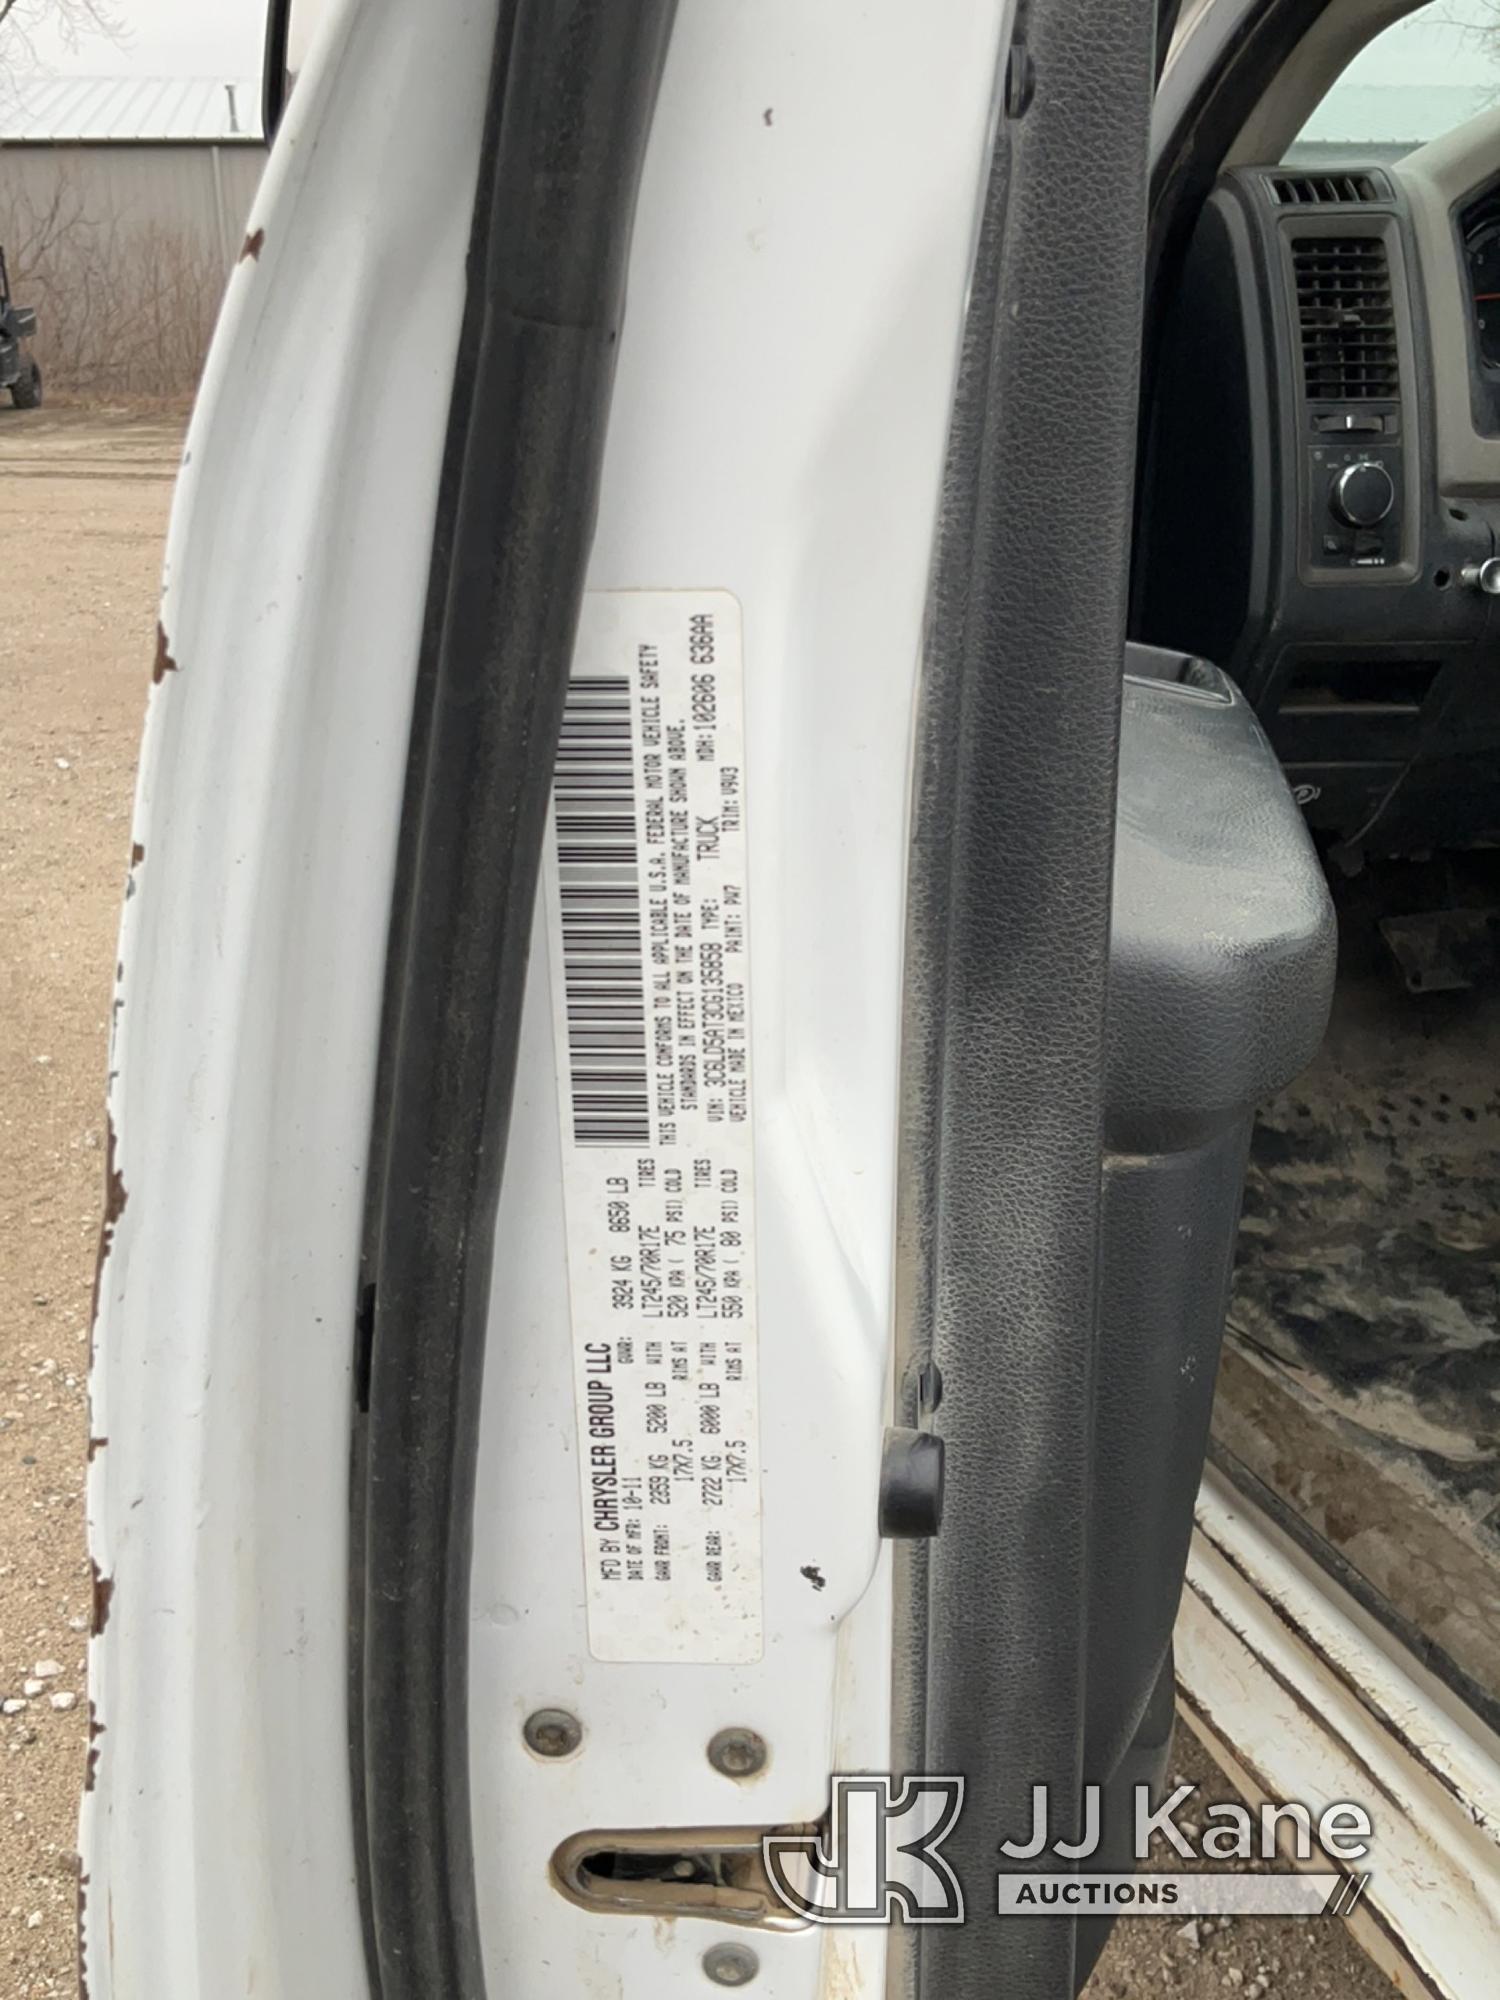 (Des Moines, IA) 2012 RAM 2500 4x4 Run & Moves) (engine knock, rough idle, check engine light